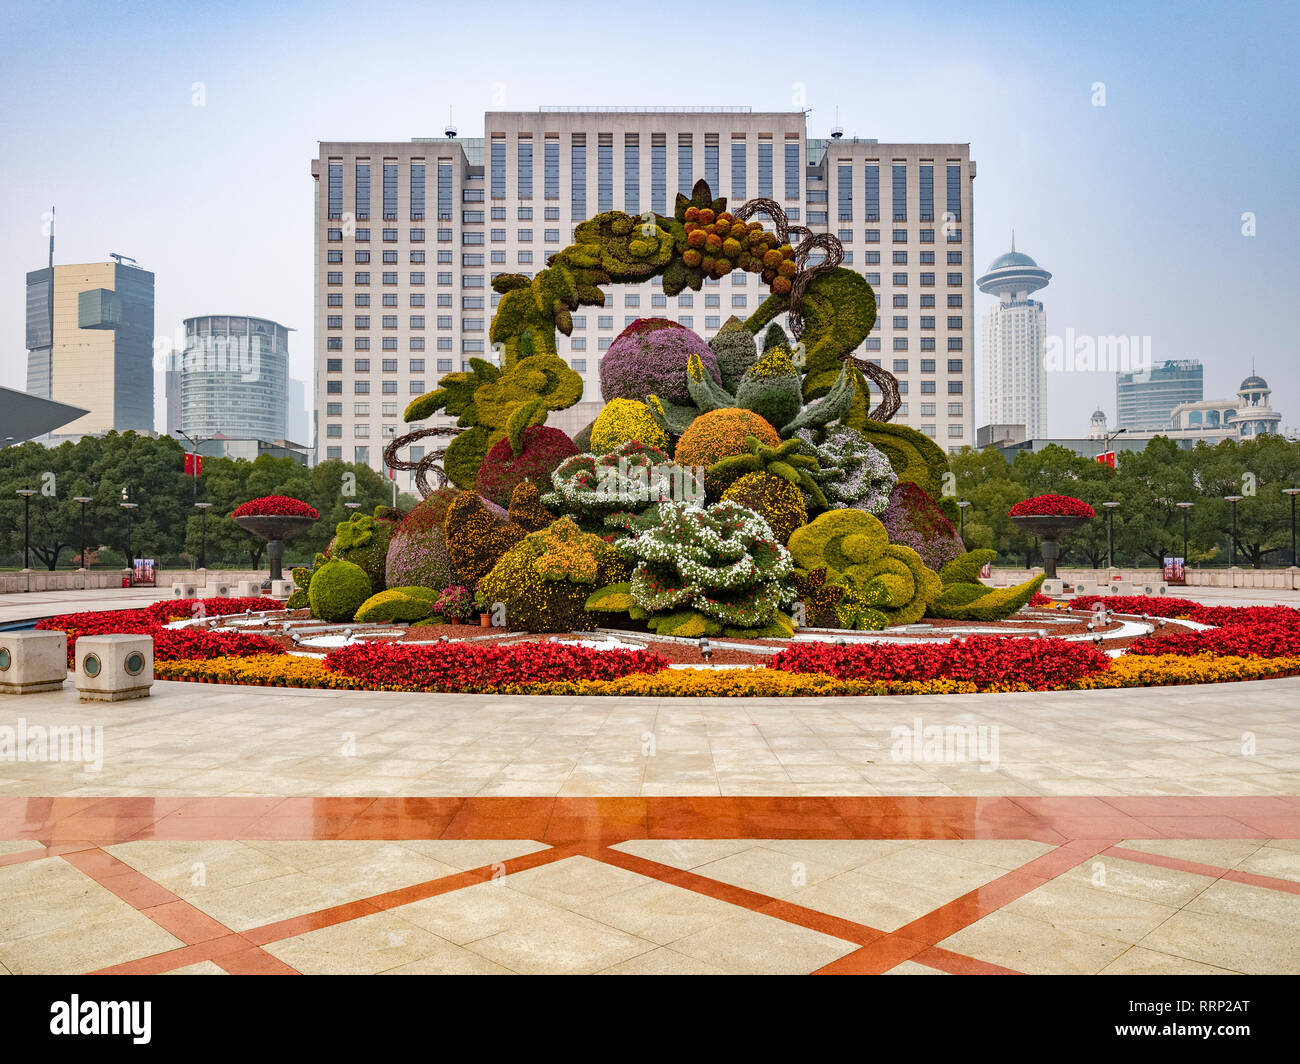 28 November 2018: Shanghai, China - Floral and topiary display in People's Square and the People's Government Building, Shanghai. Stock Photo